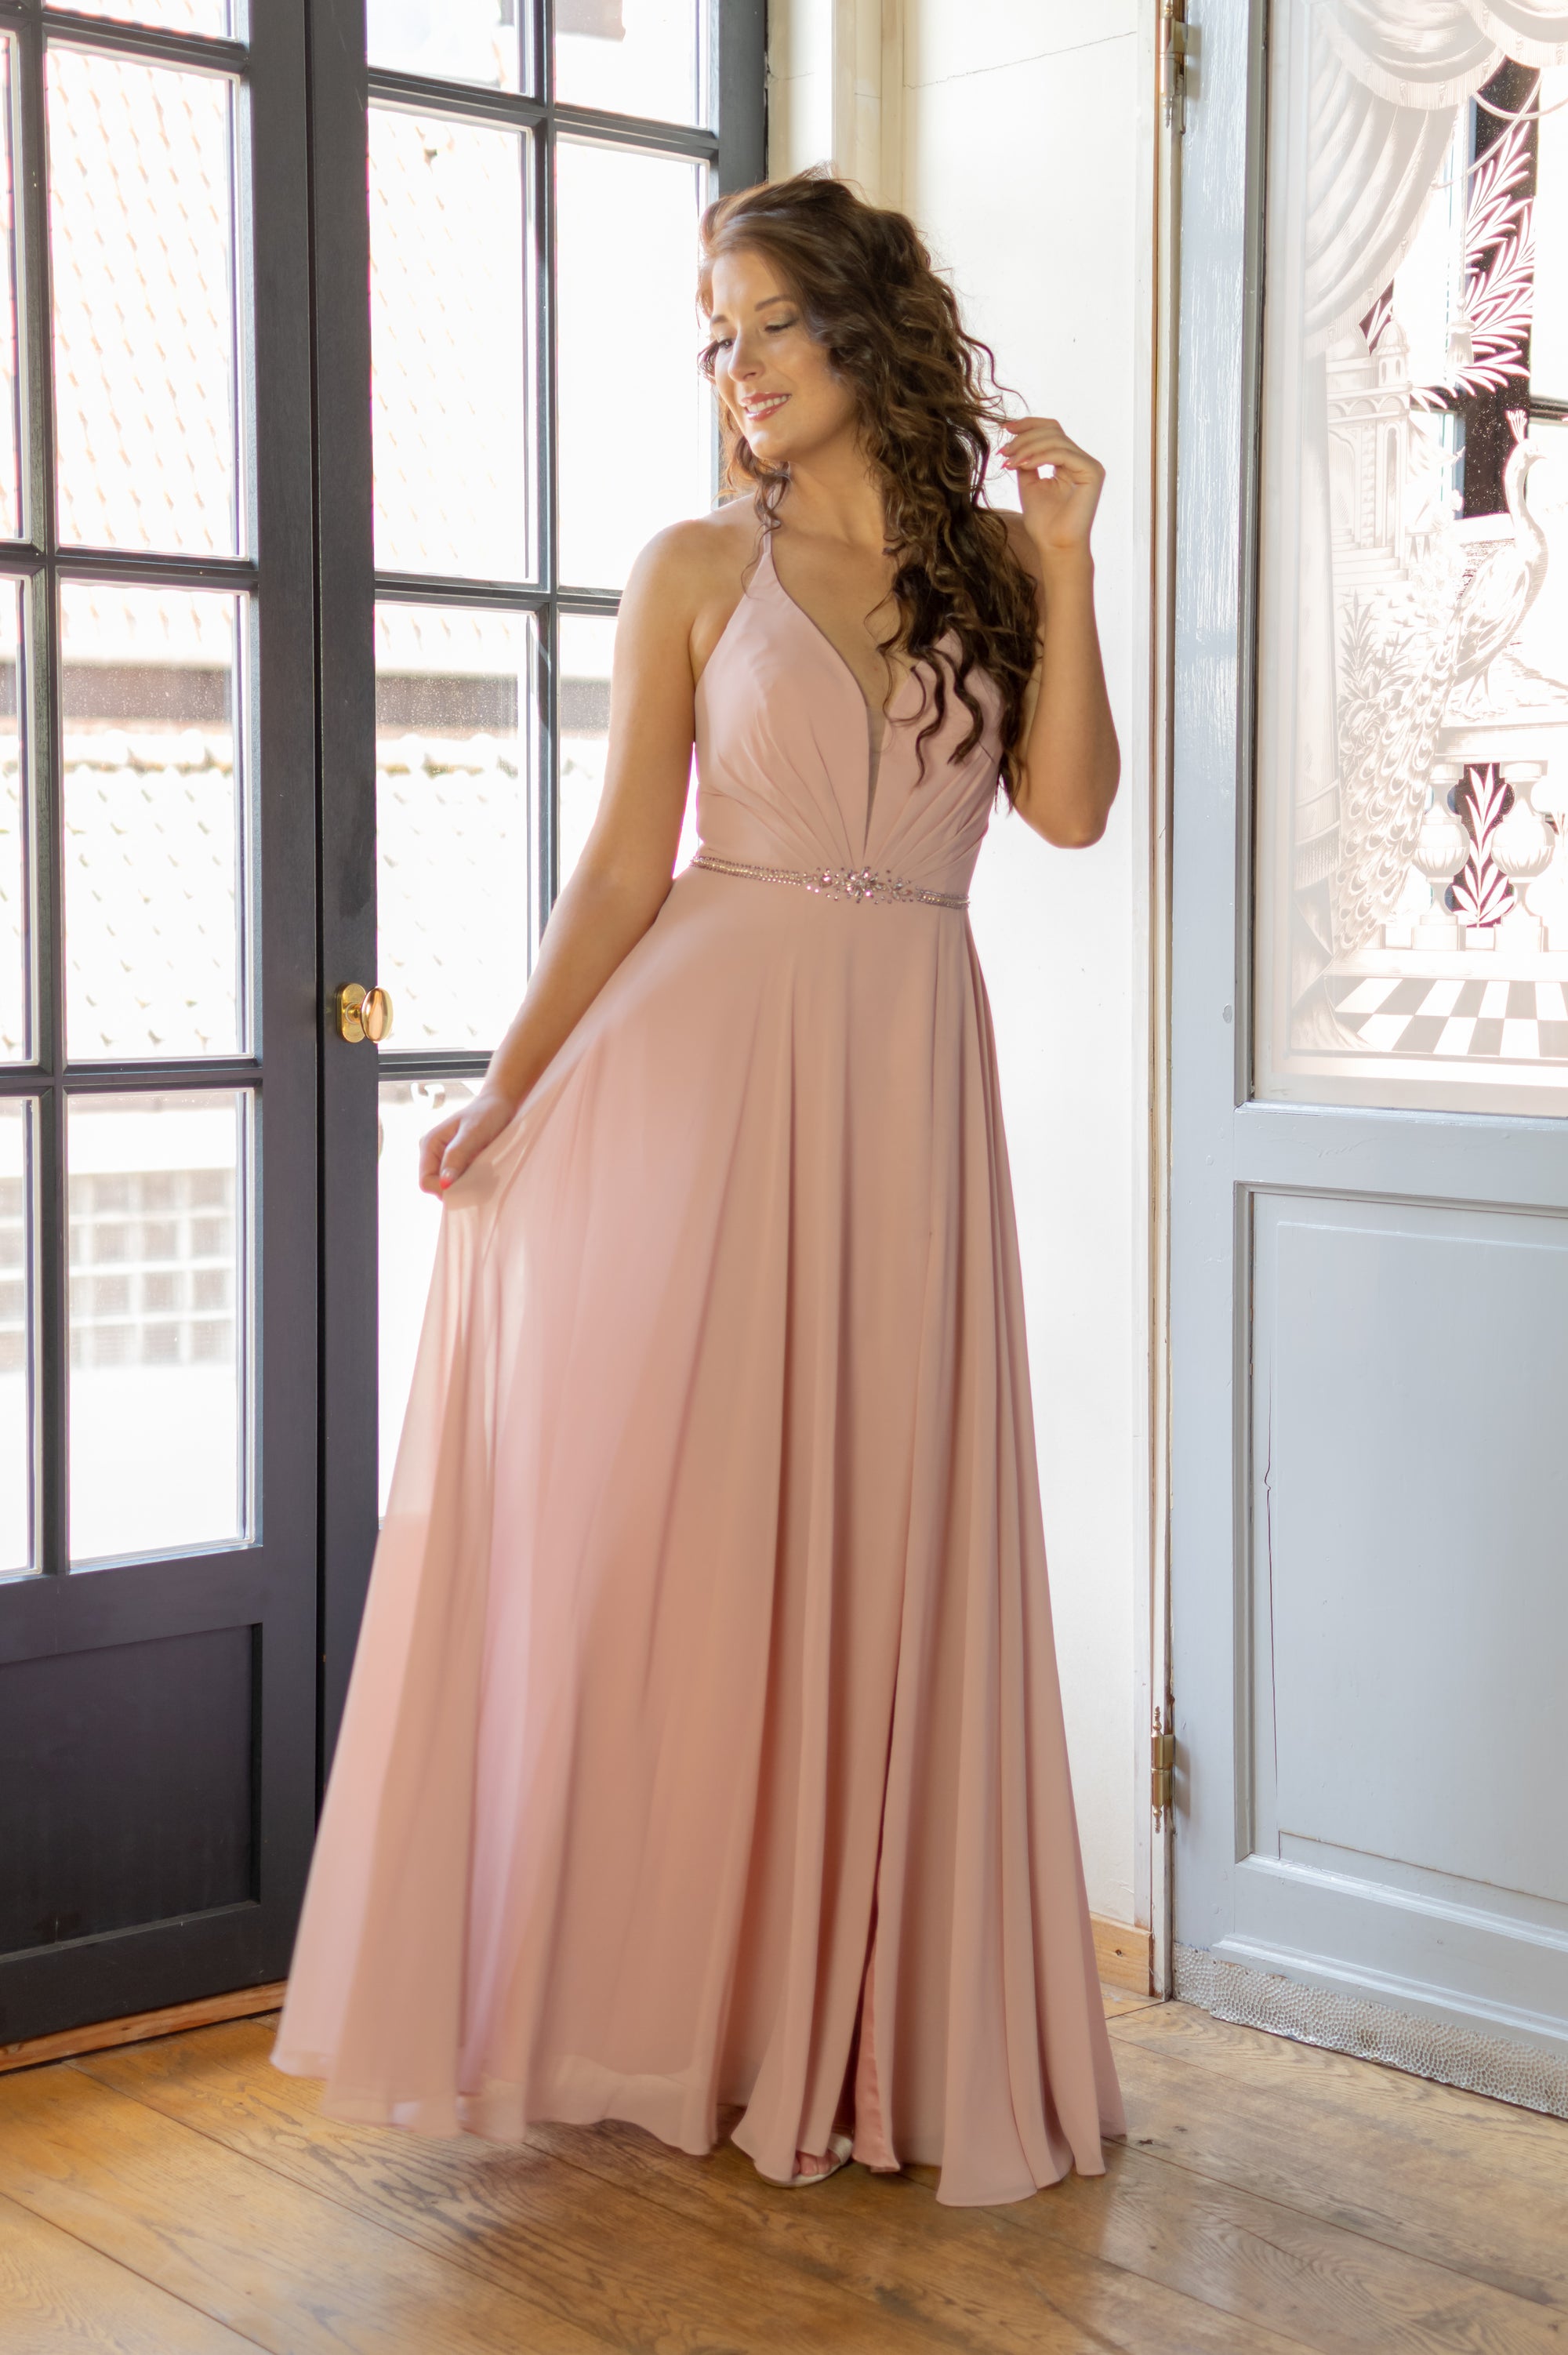 Jaw Dropping Dress - Old Pink